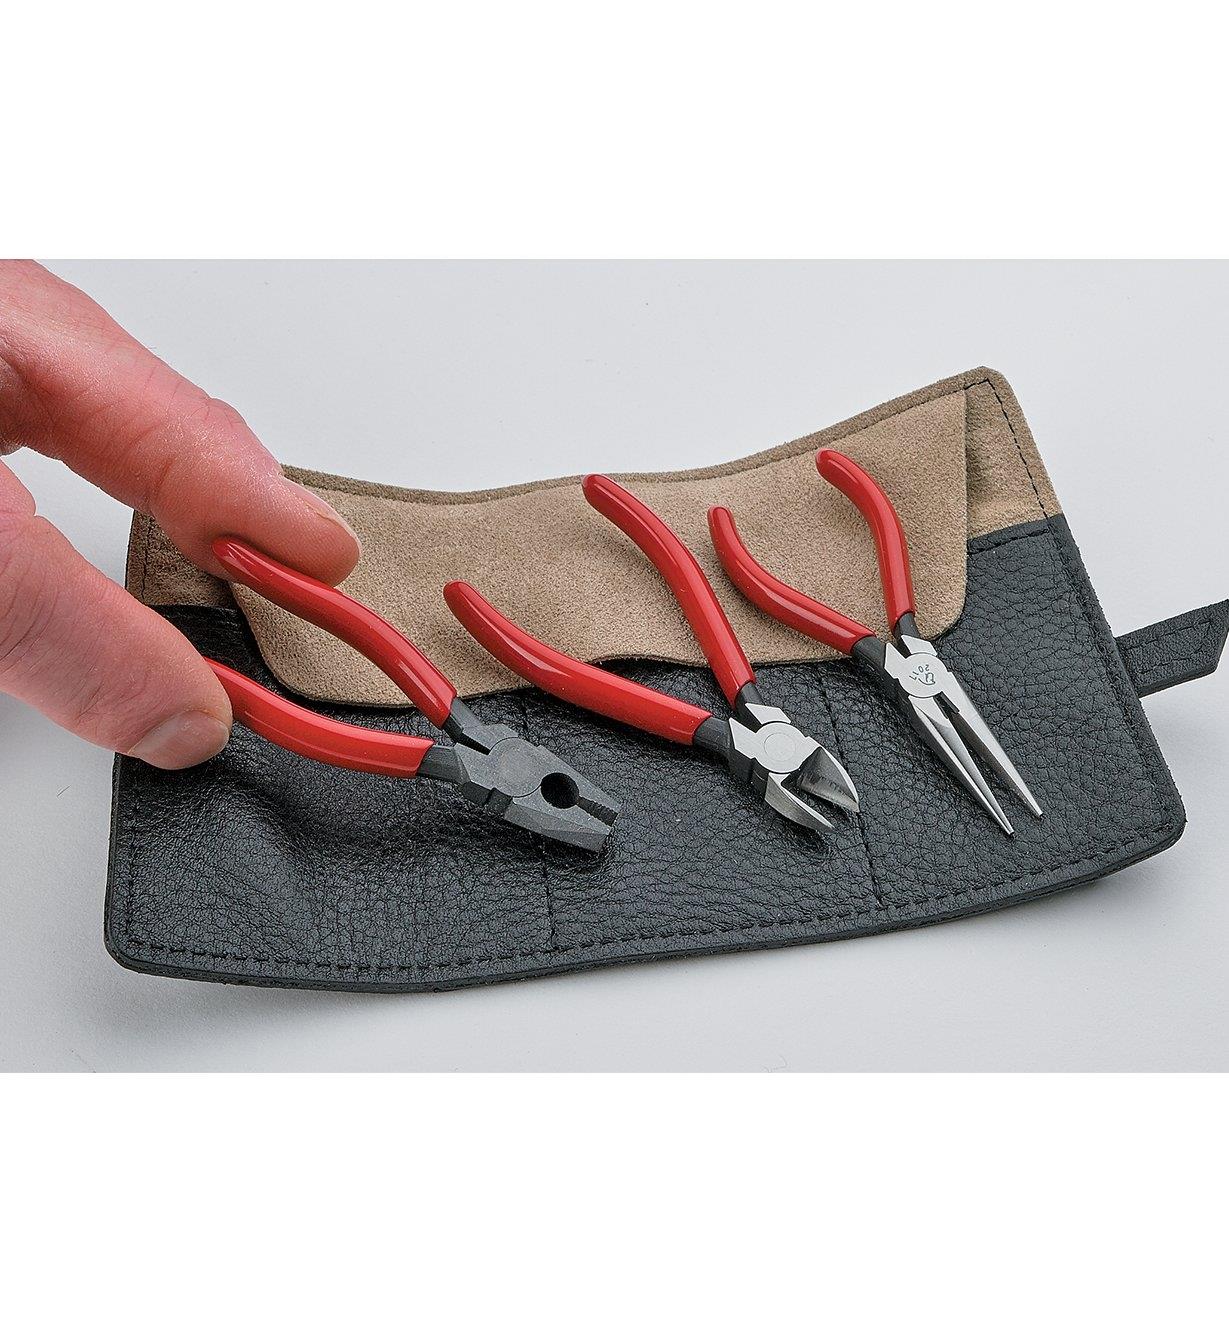 Three Chiisai pliers sitting on top of the included tool roll